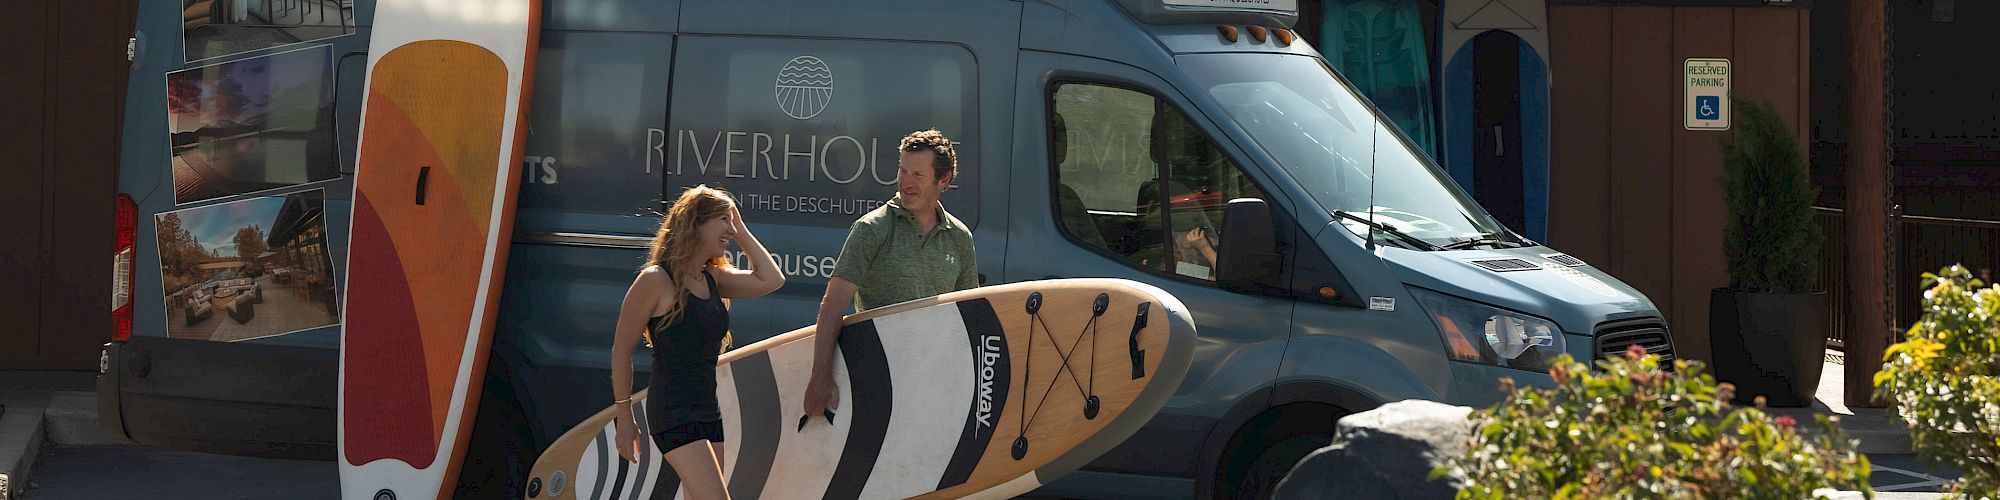 Two people holding surfboards stand in front of a van, parked at a building labeled 